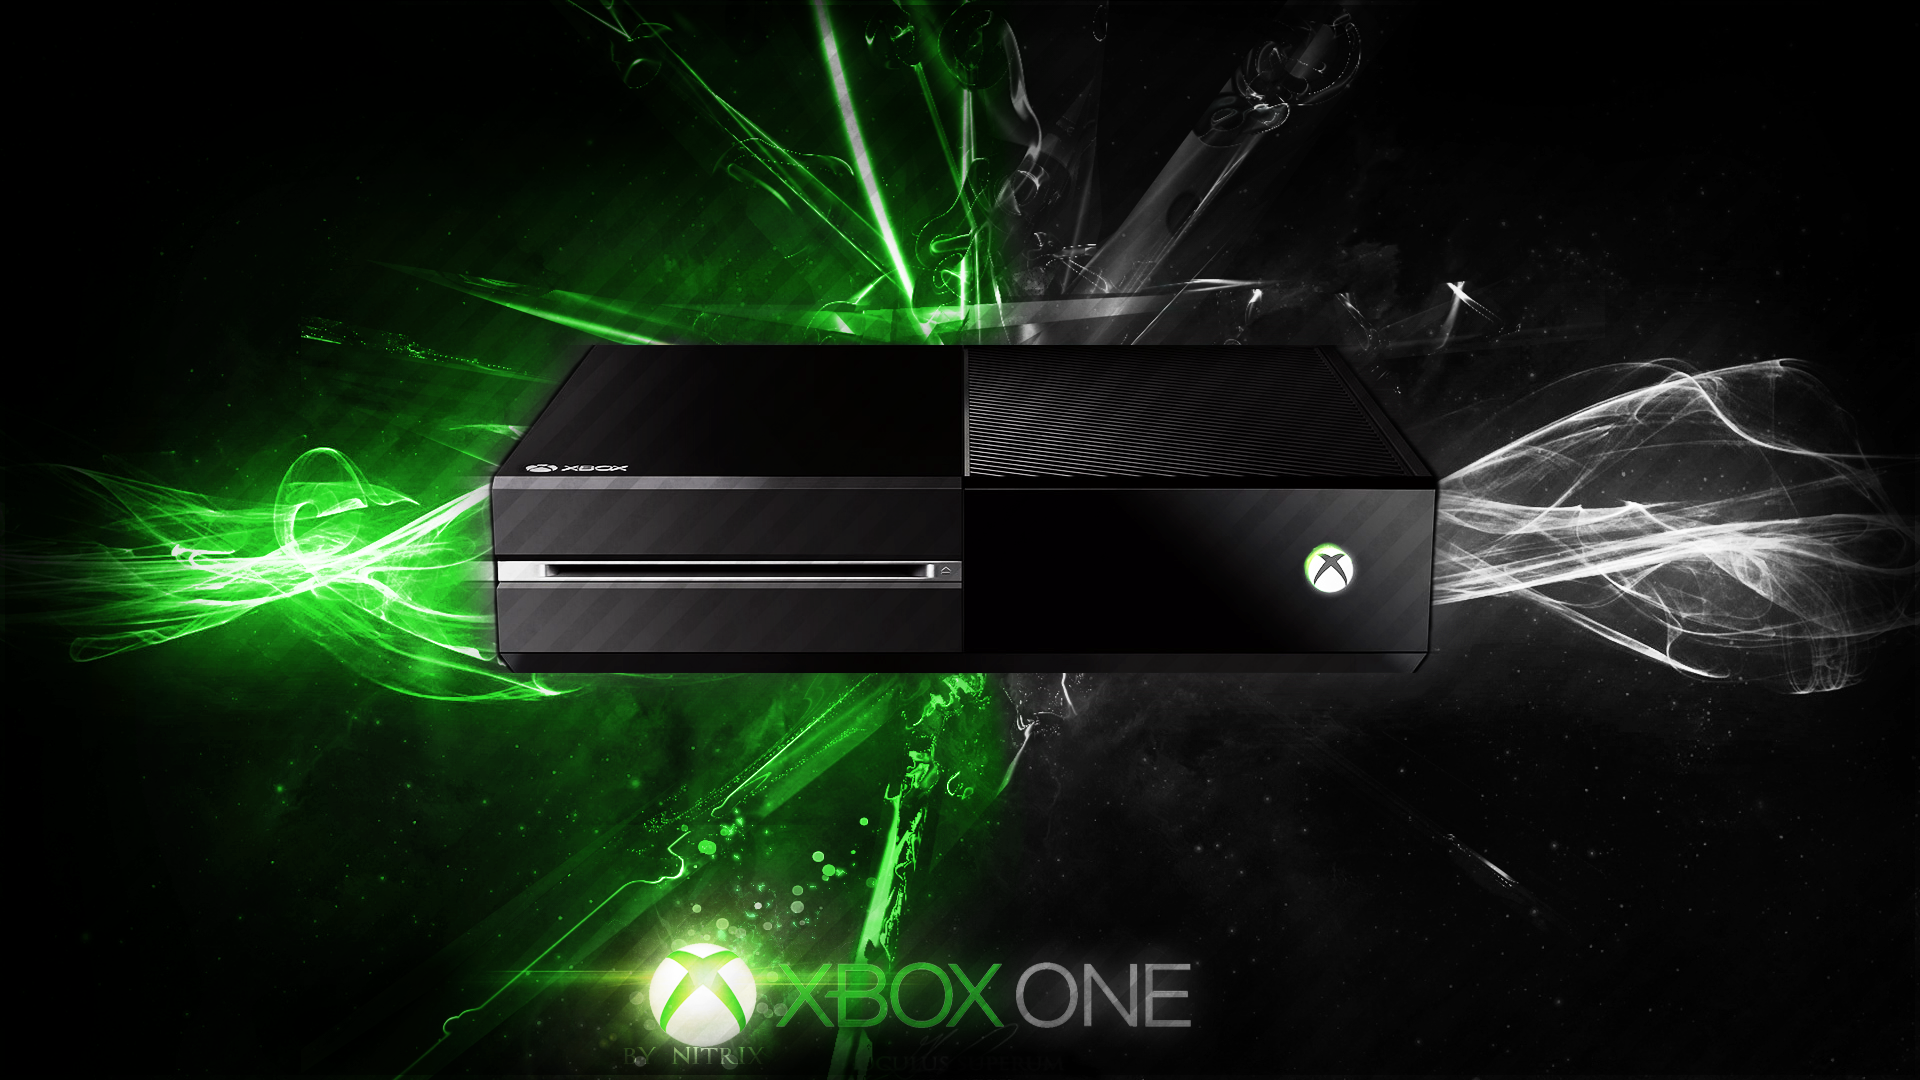 Cool Wallpaper for Xbox One